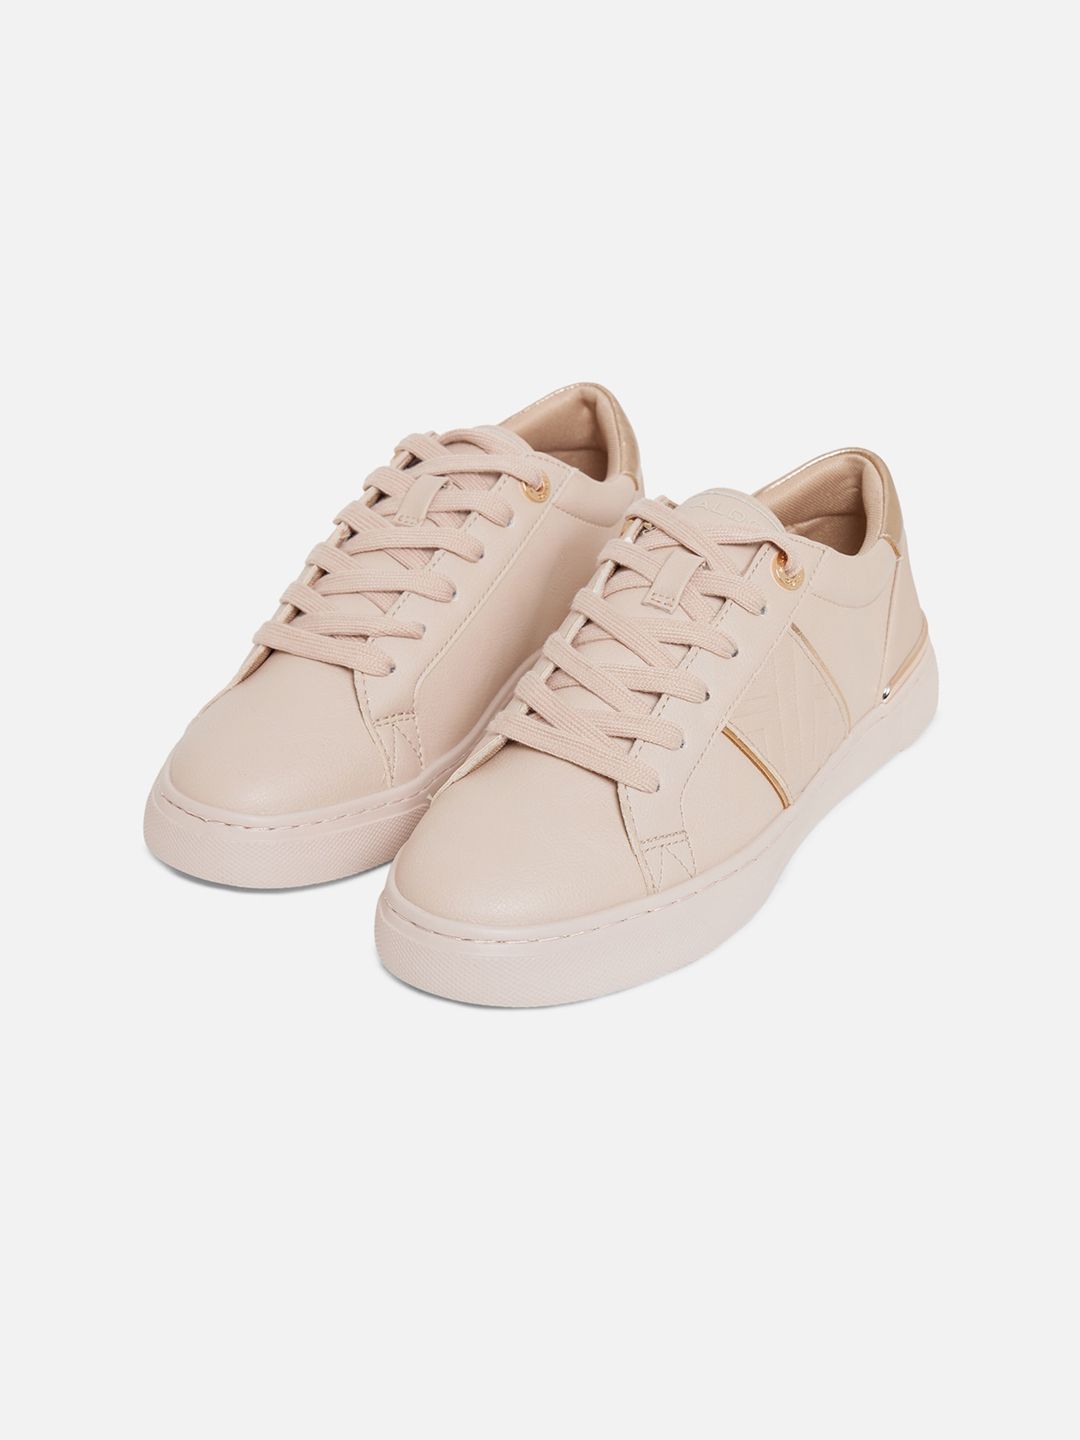 ALDO Women Pink & Rose-Gold Toned Colourblocked Sneakers Price in India